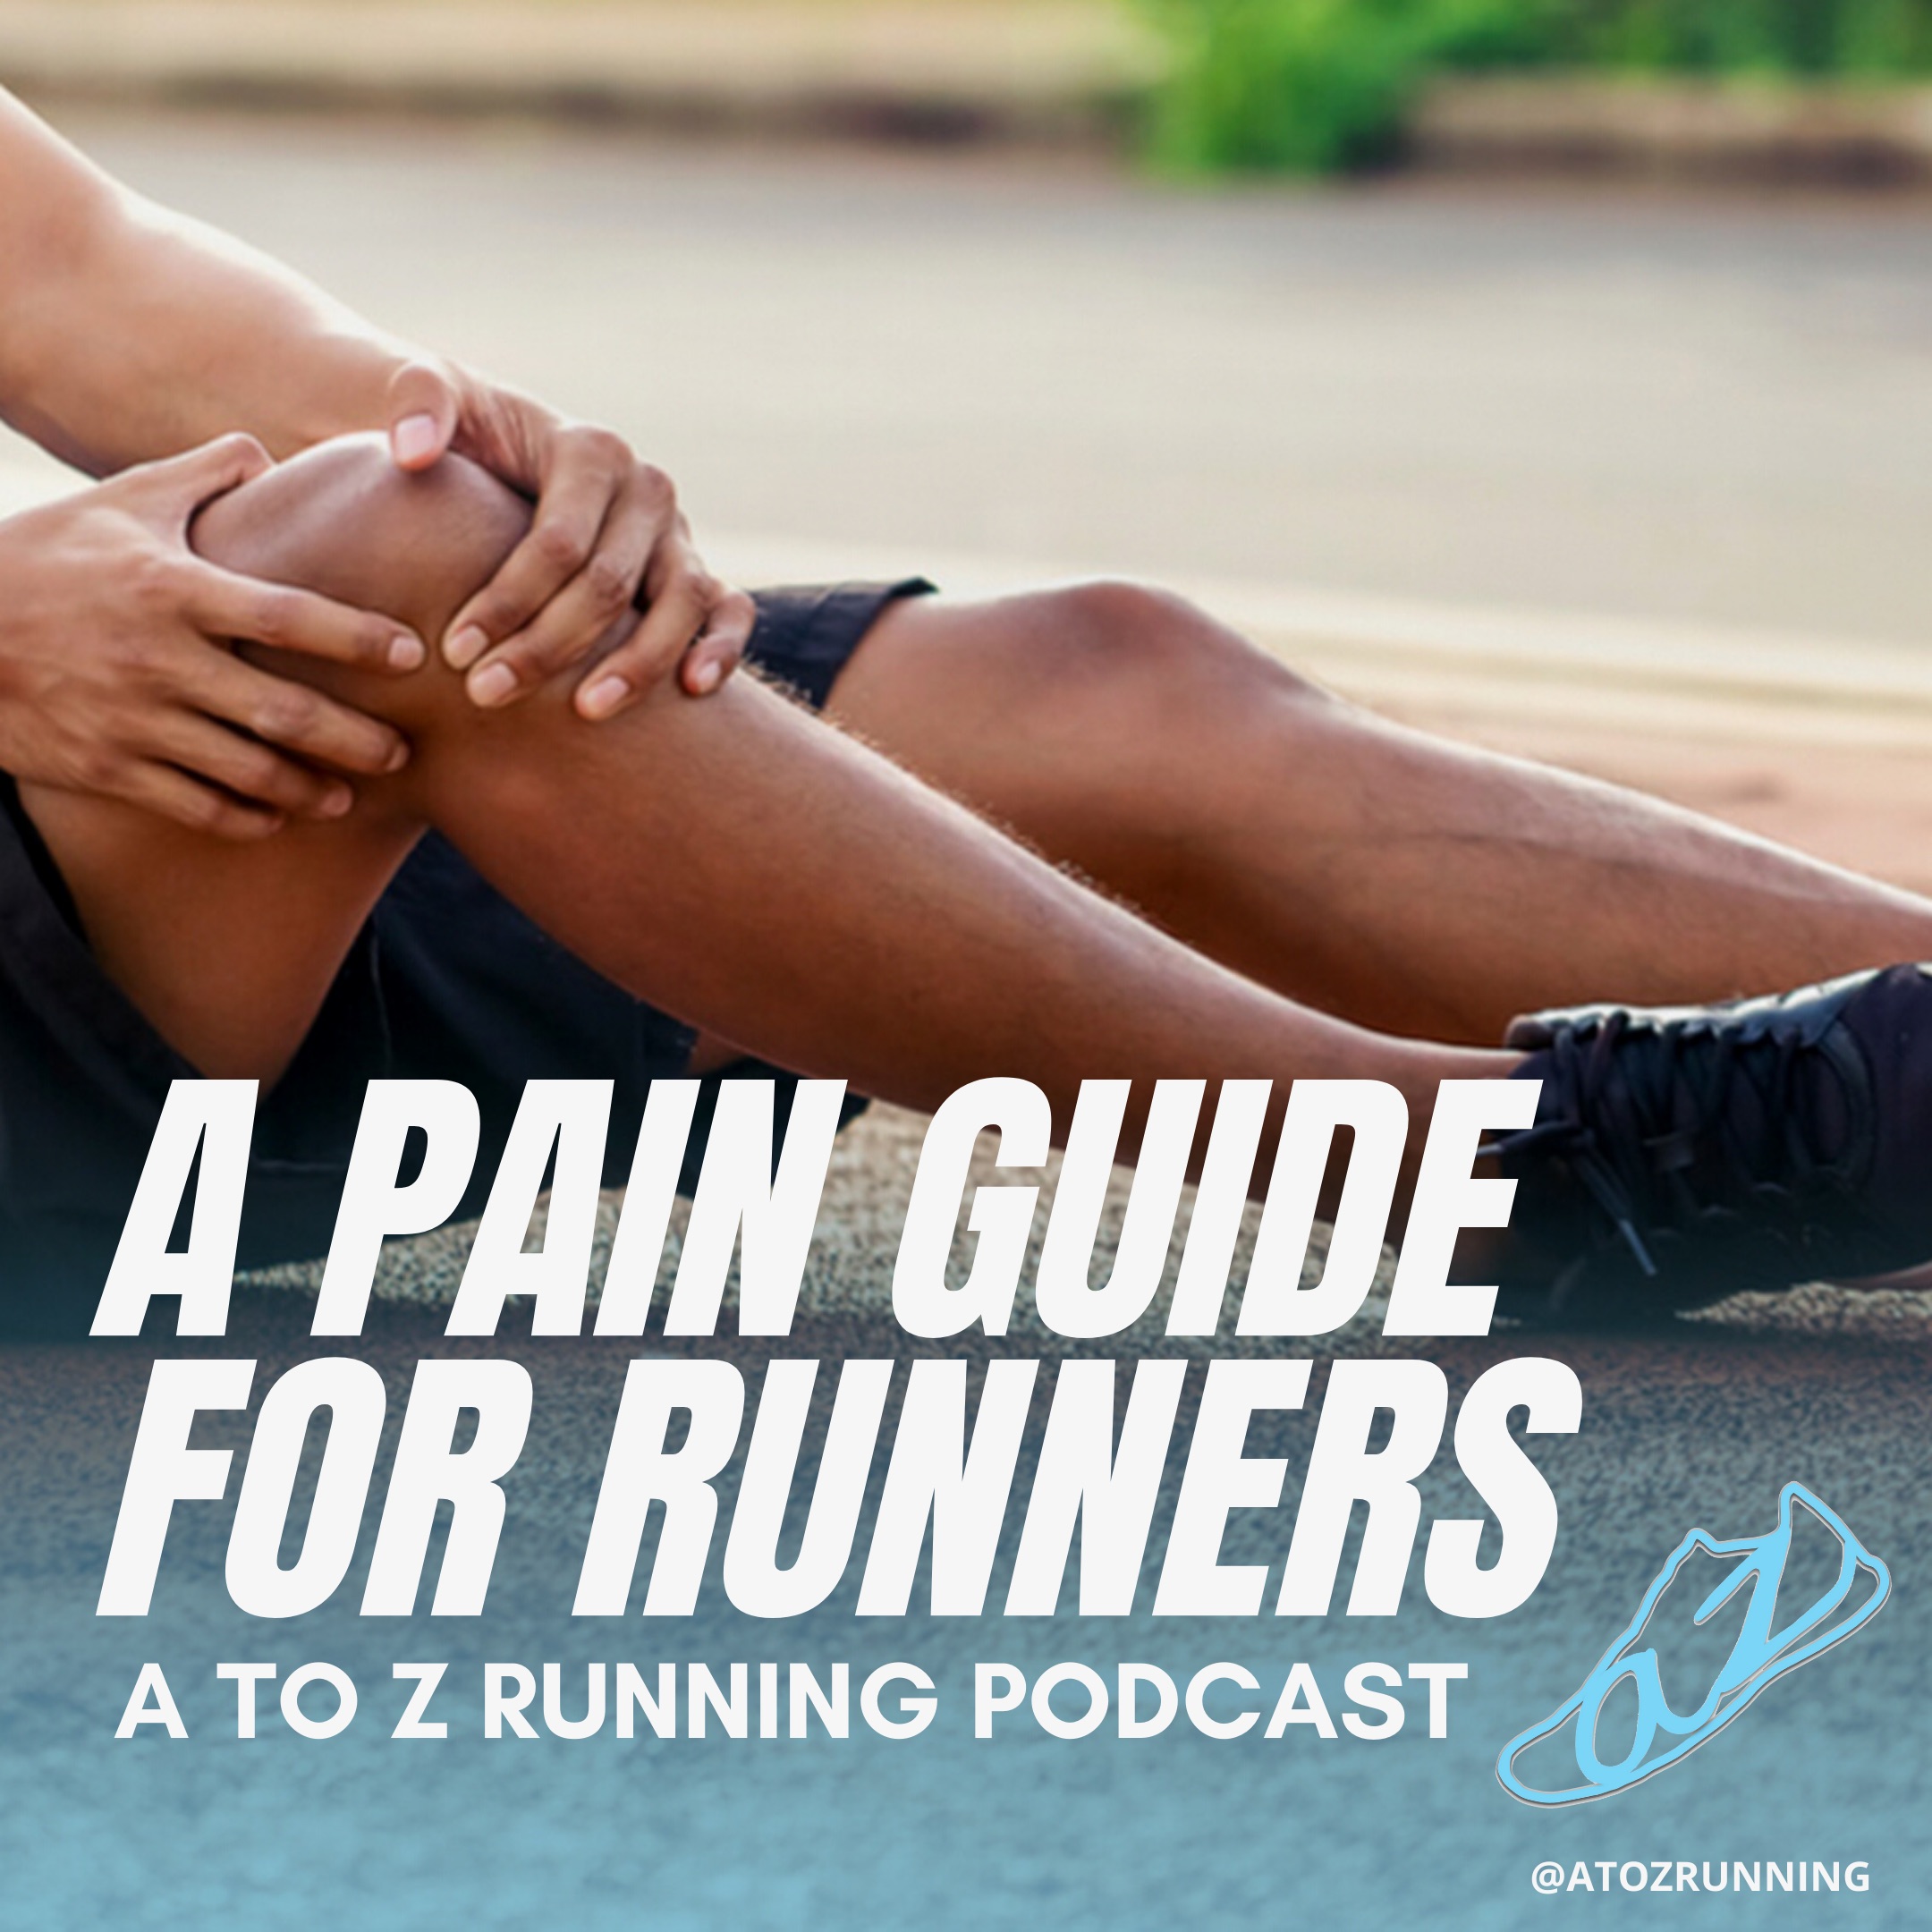 A Pain Guide for Runners